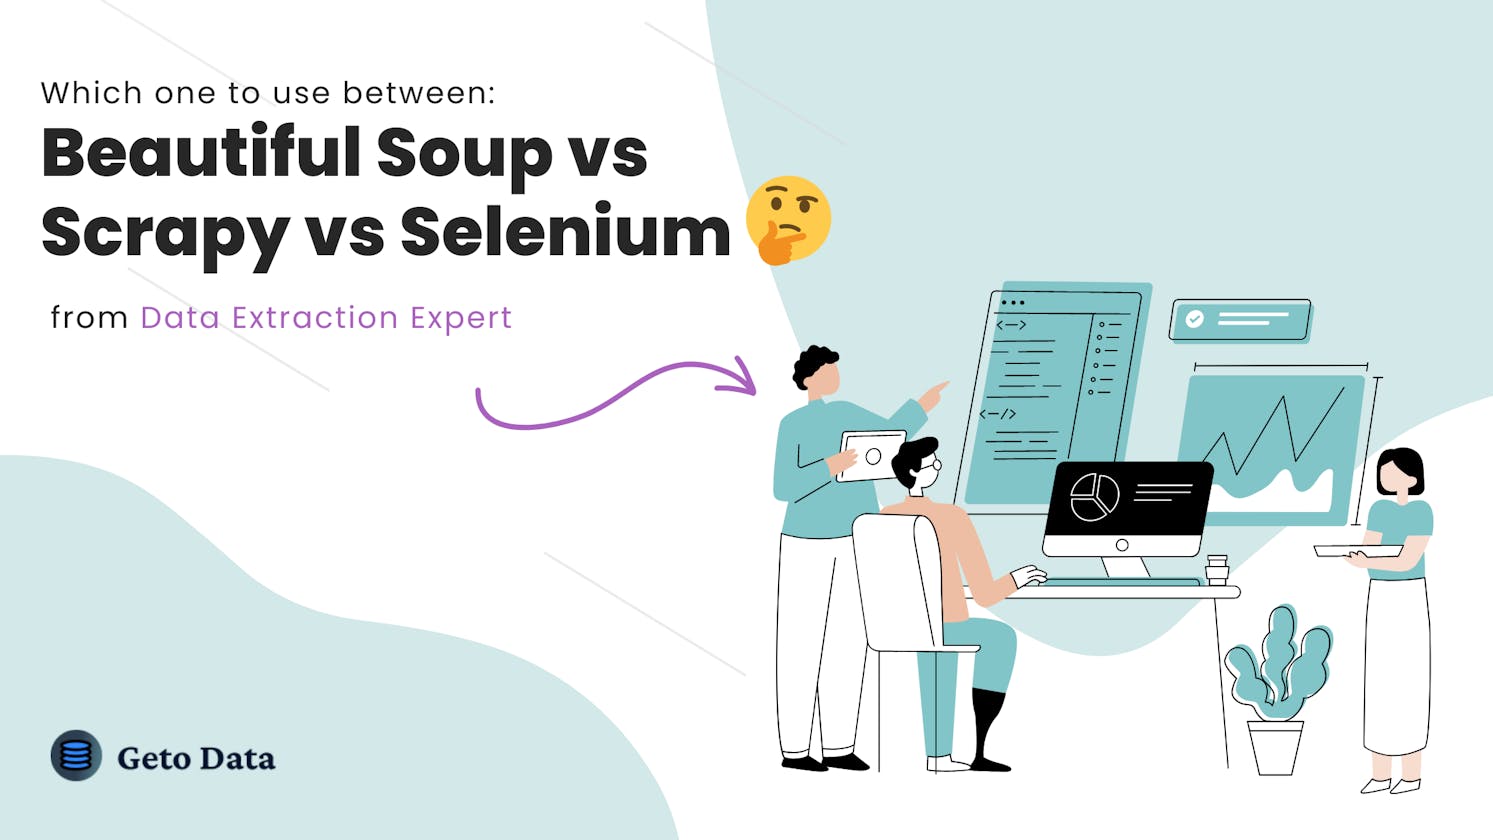 Cover Image for Beautiful Soup vs Scrapy vs Selenium - Which one to use? Python Web scraping